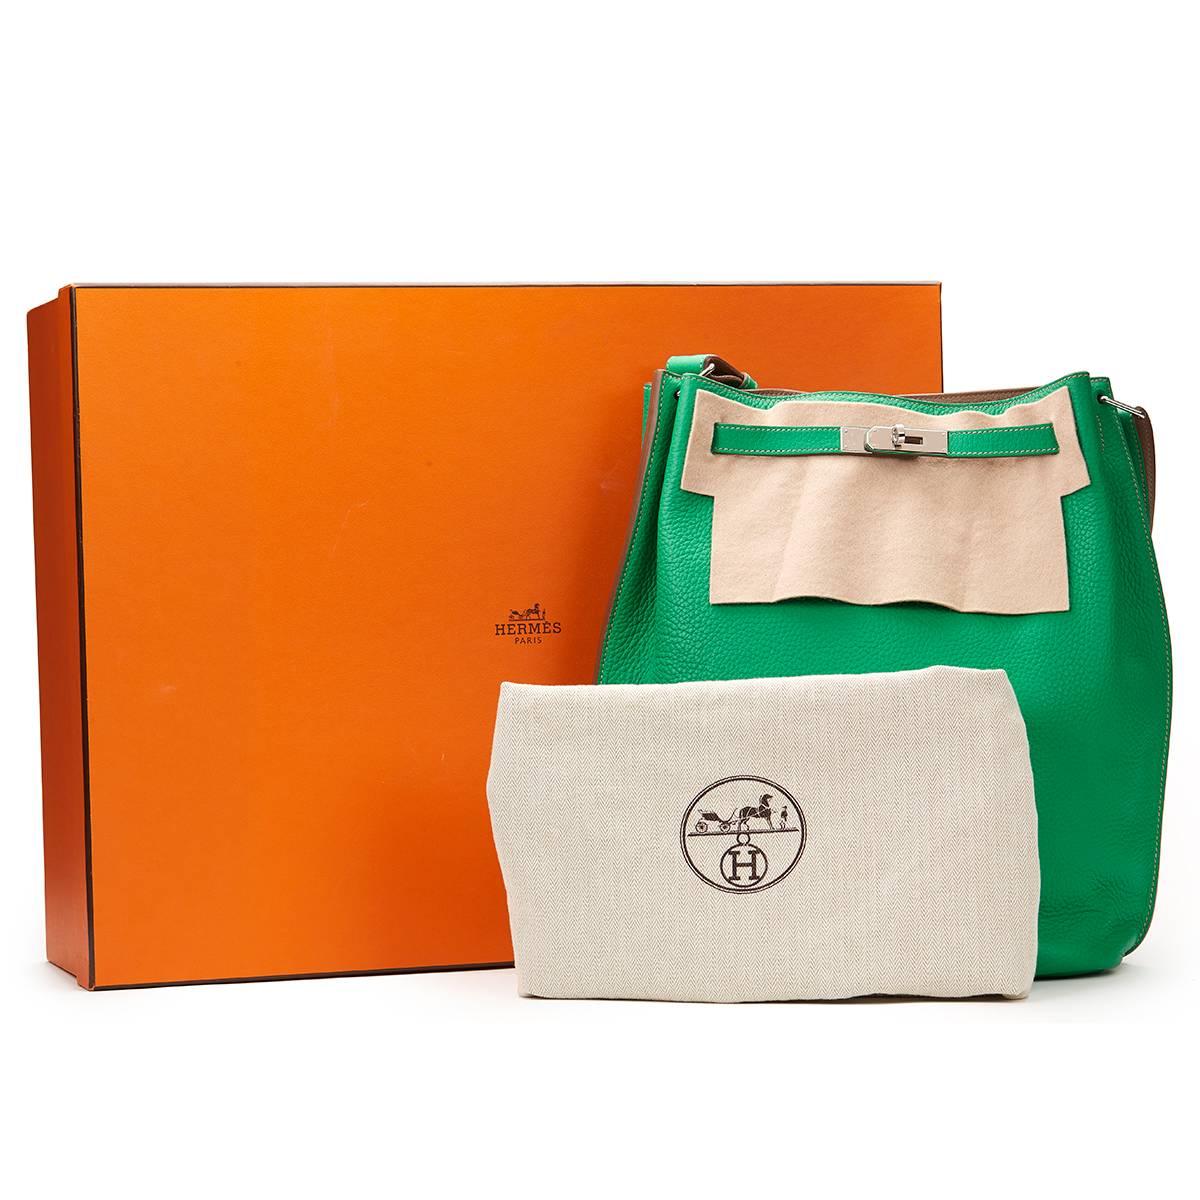 2013 Hermes Menthe Clemence Leather So Kelly 26 4